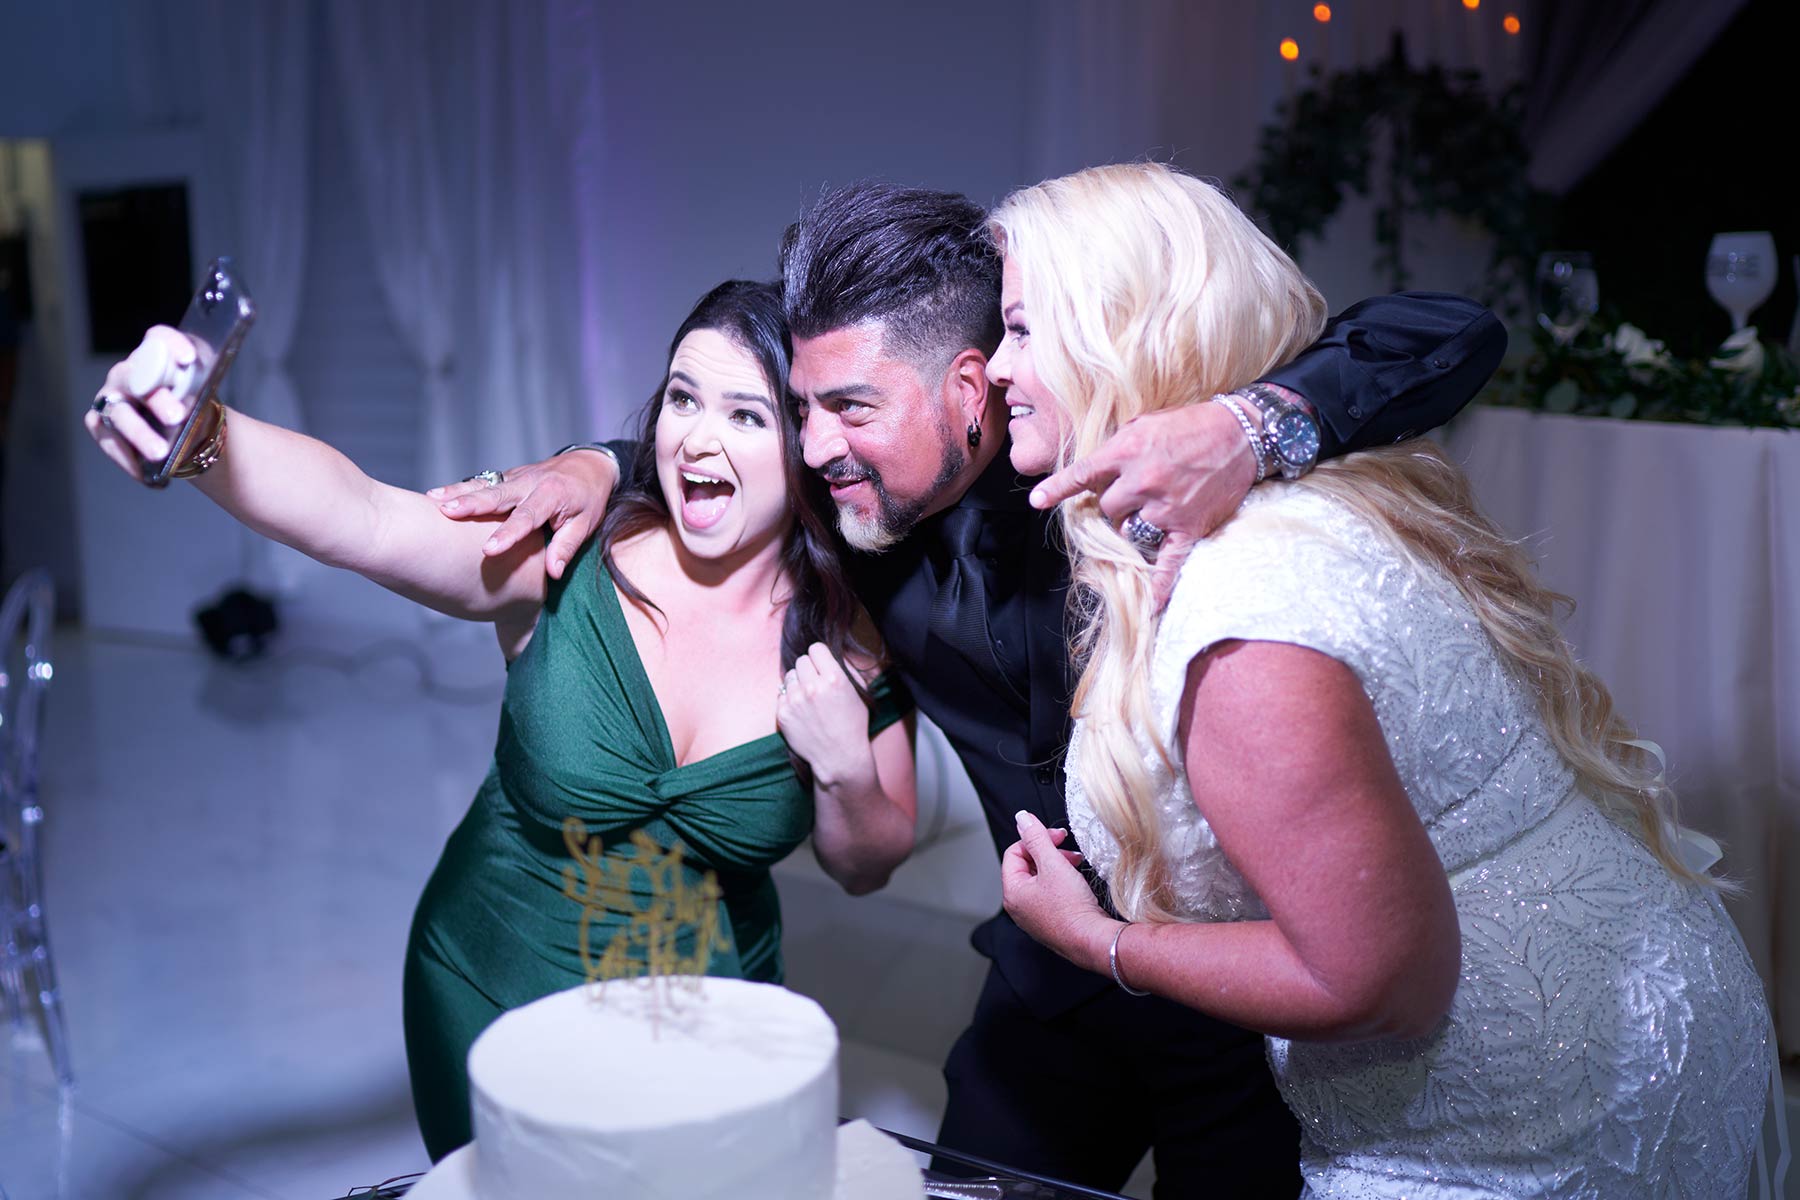 Bride-and-groom-posing-for-selfie-with-millenial-guest